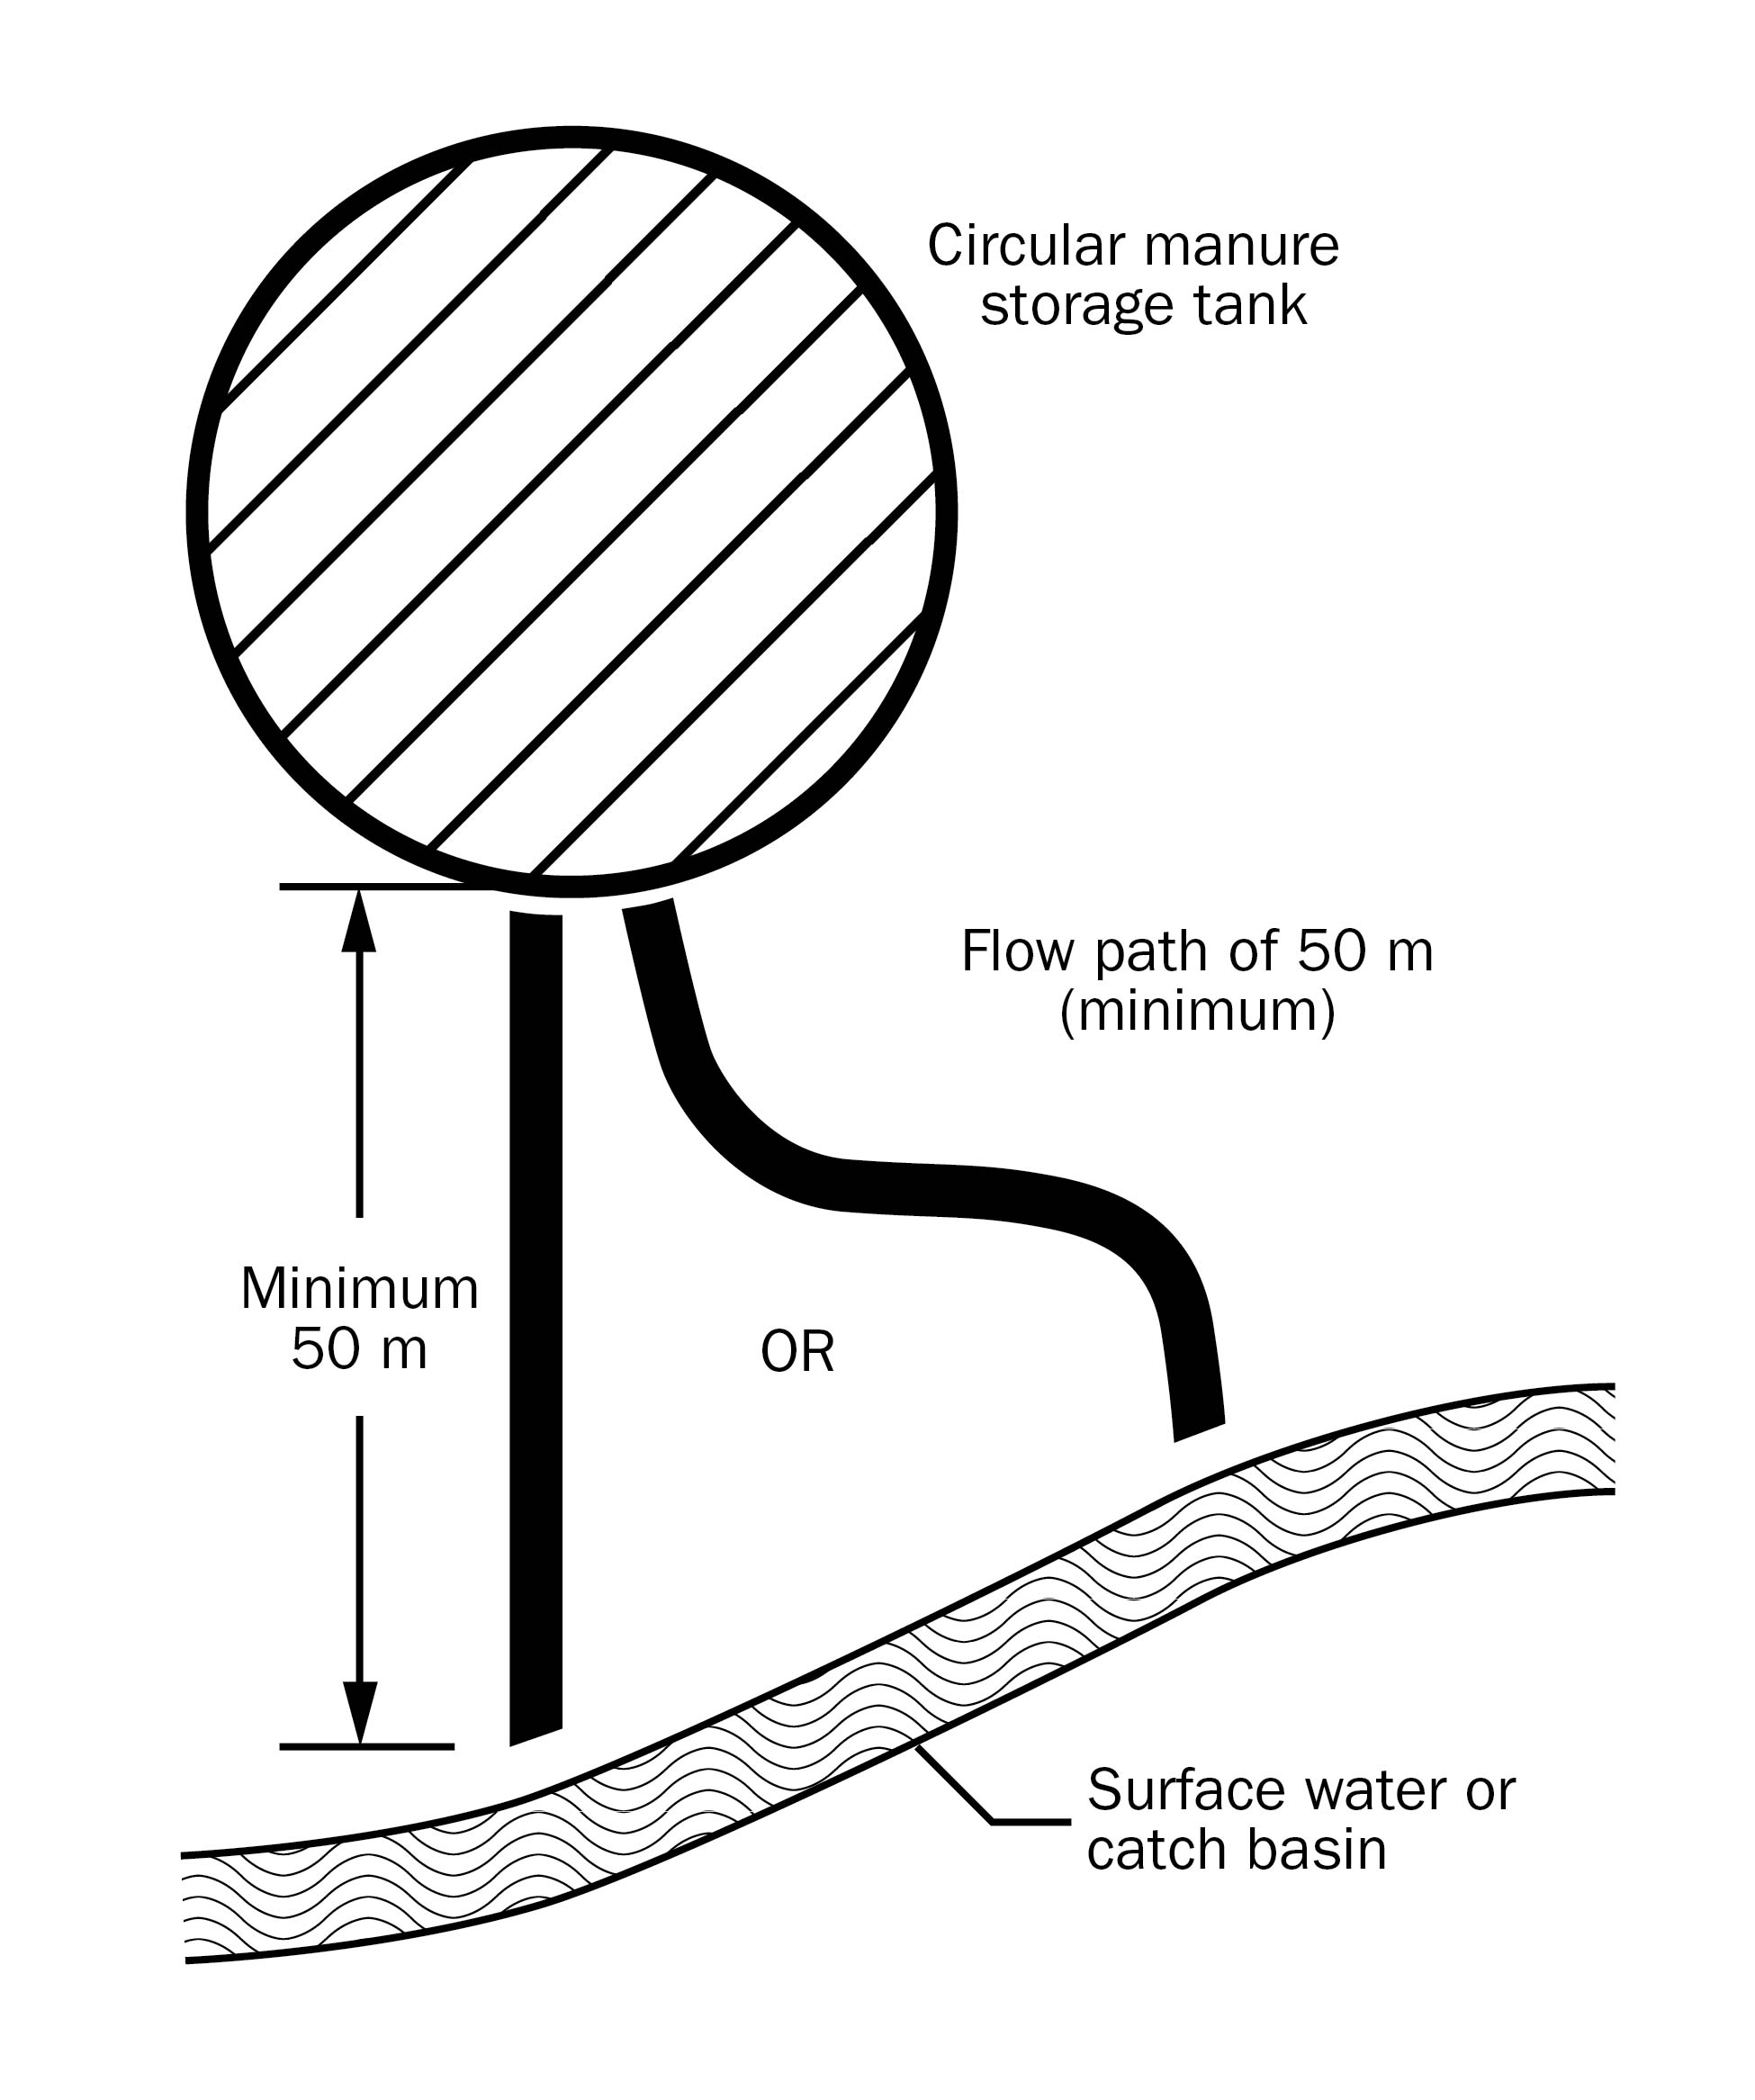 A large circular manure storage tank in the north left corner and a surface water or catch basin 50 m south of the storage tank.  From the tank to the surface water is a 50 m flow path. The point of the drawing is that a flow path from the storage tank to the surface water does not always follow a straight line, and it is important to allow sufficient distance for flow control in the event of a spill.